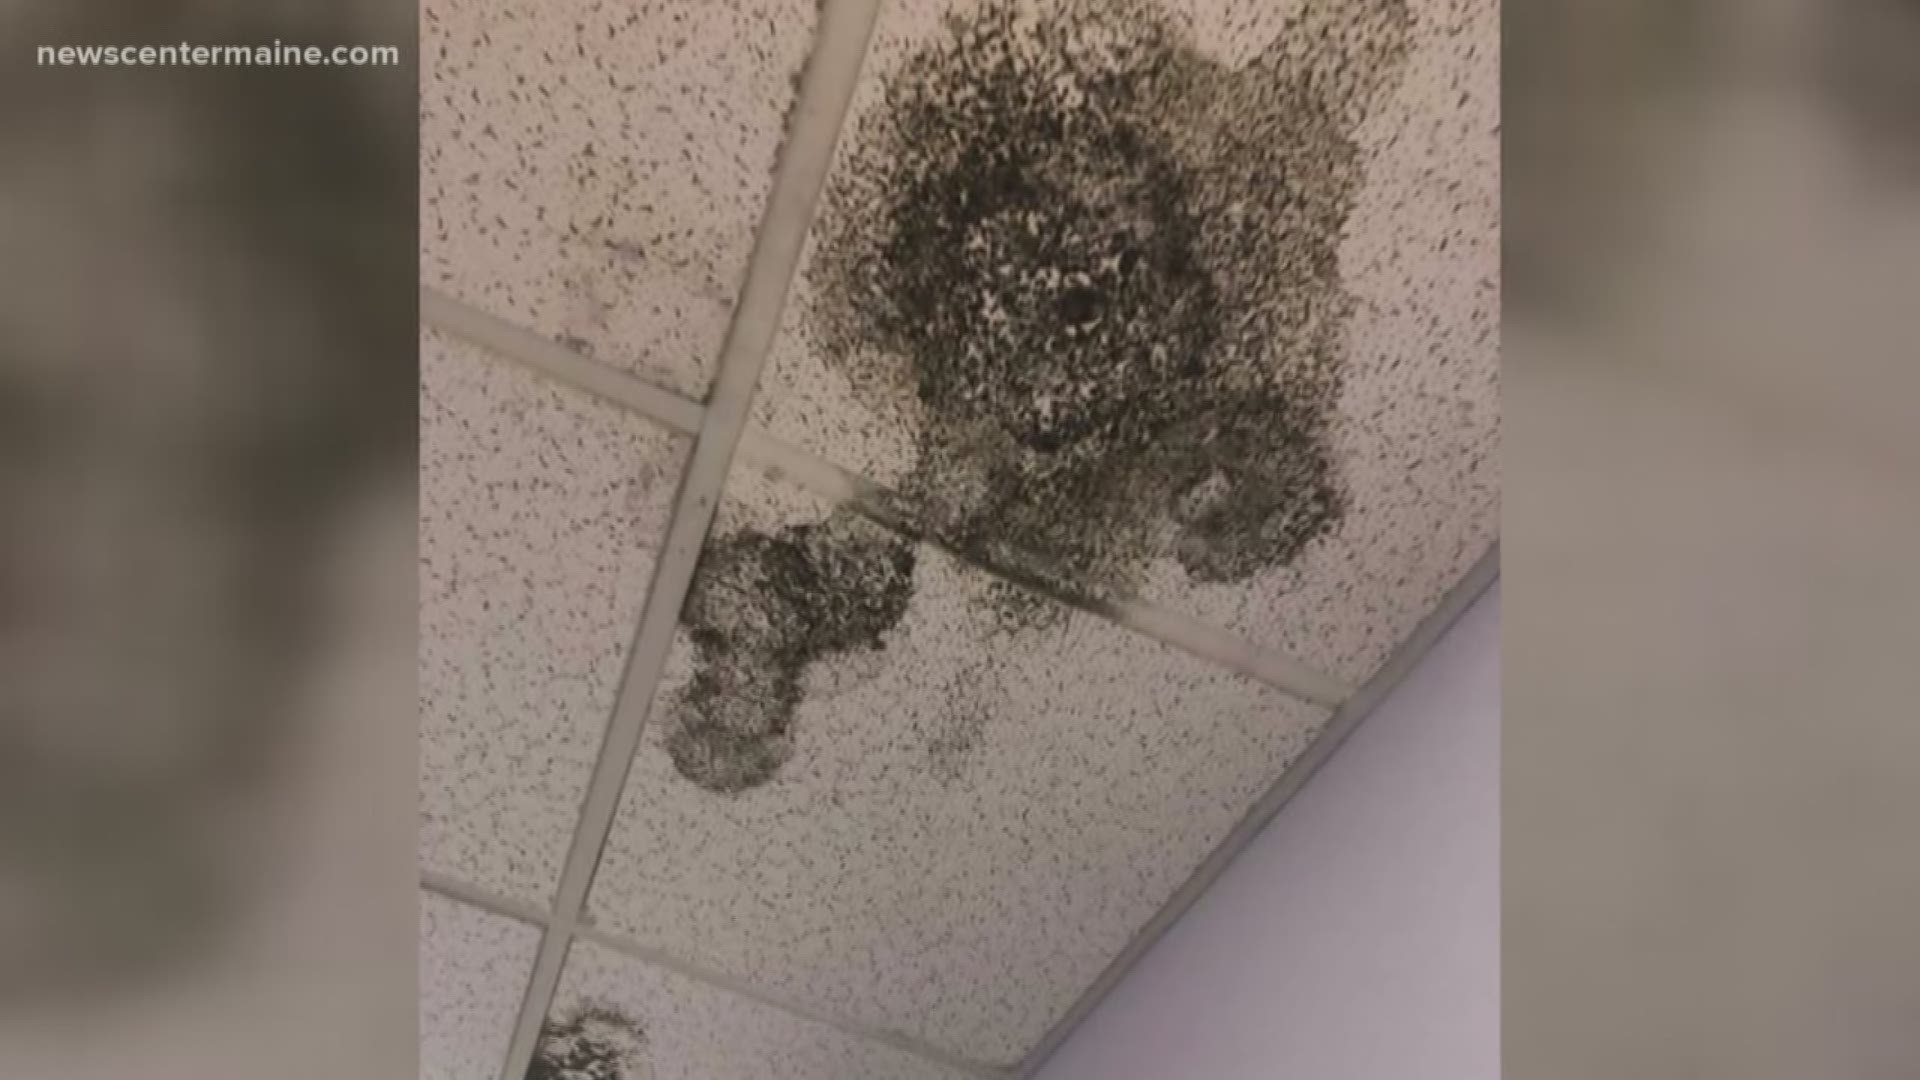 SMCC, parents, students respond to mold found in residence hall